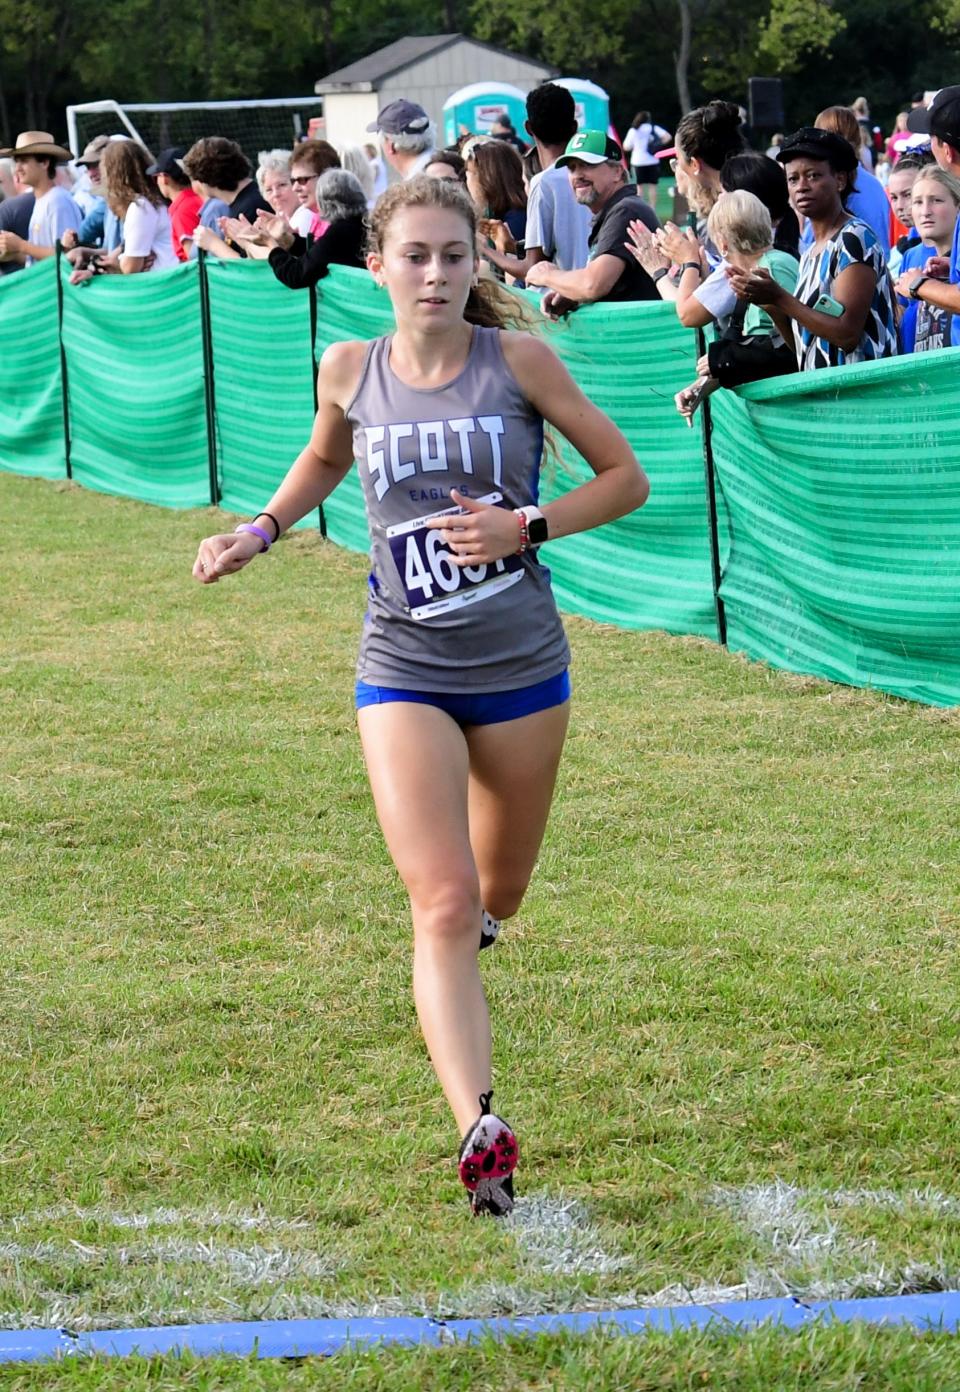 Maddie Strong of Scott took home first place in the high school small school varsity 5k at the 2022 Mason Invitational Cross Country Meet Sept. 10, 2022.